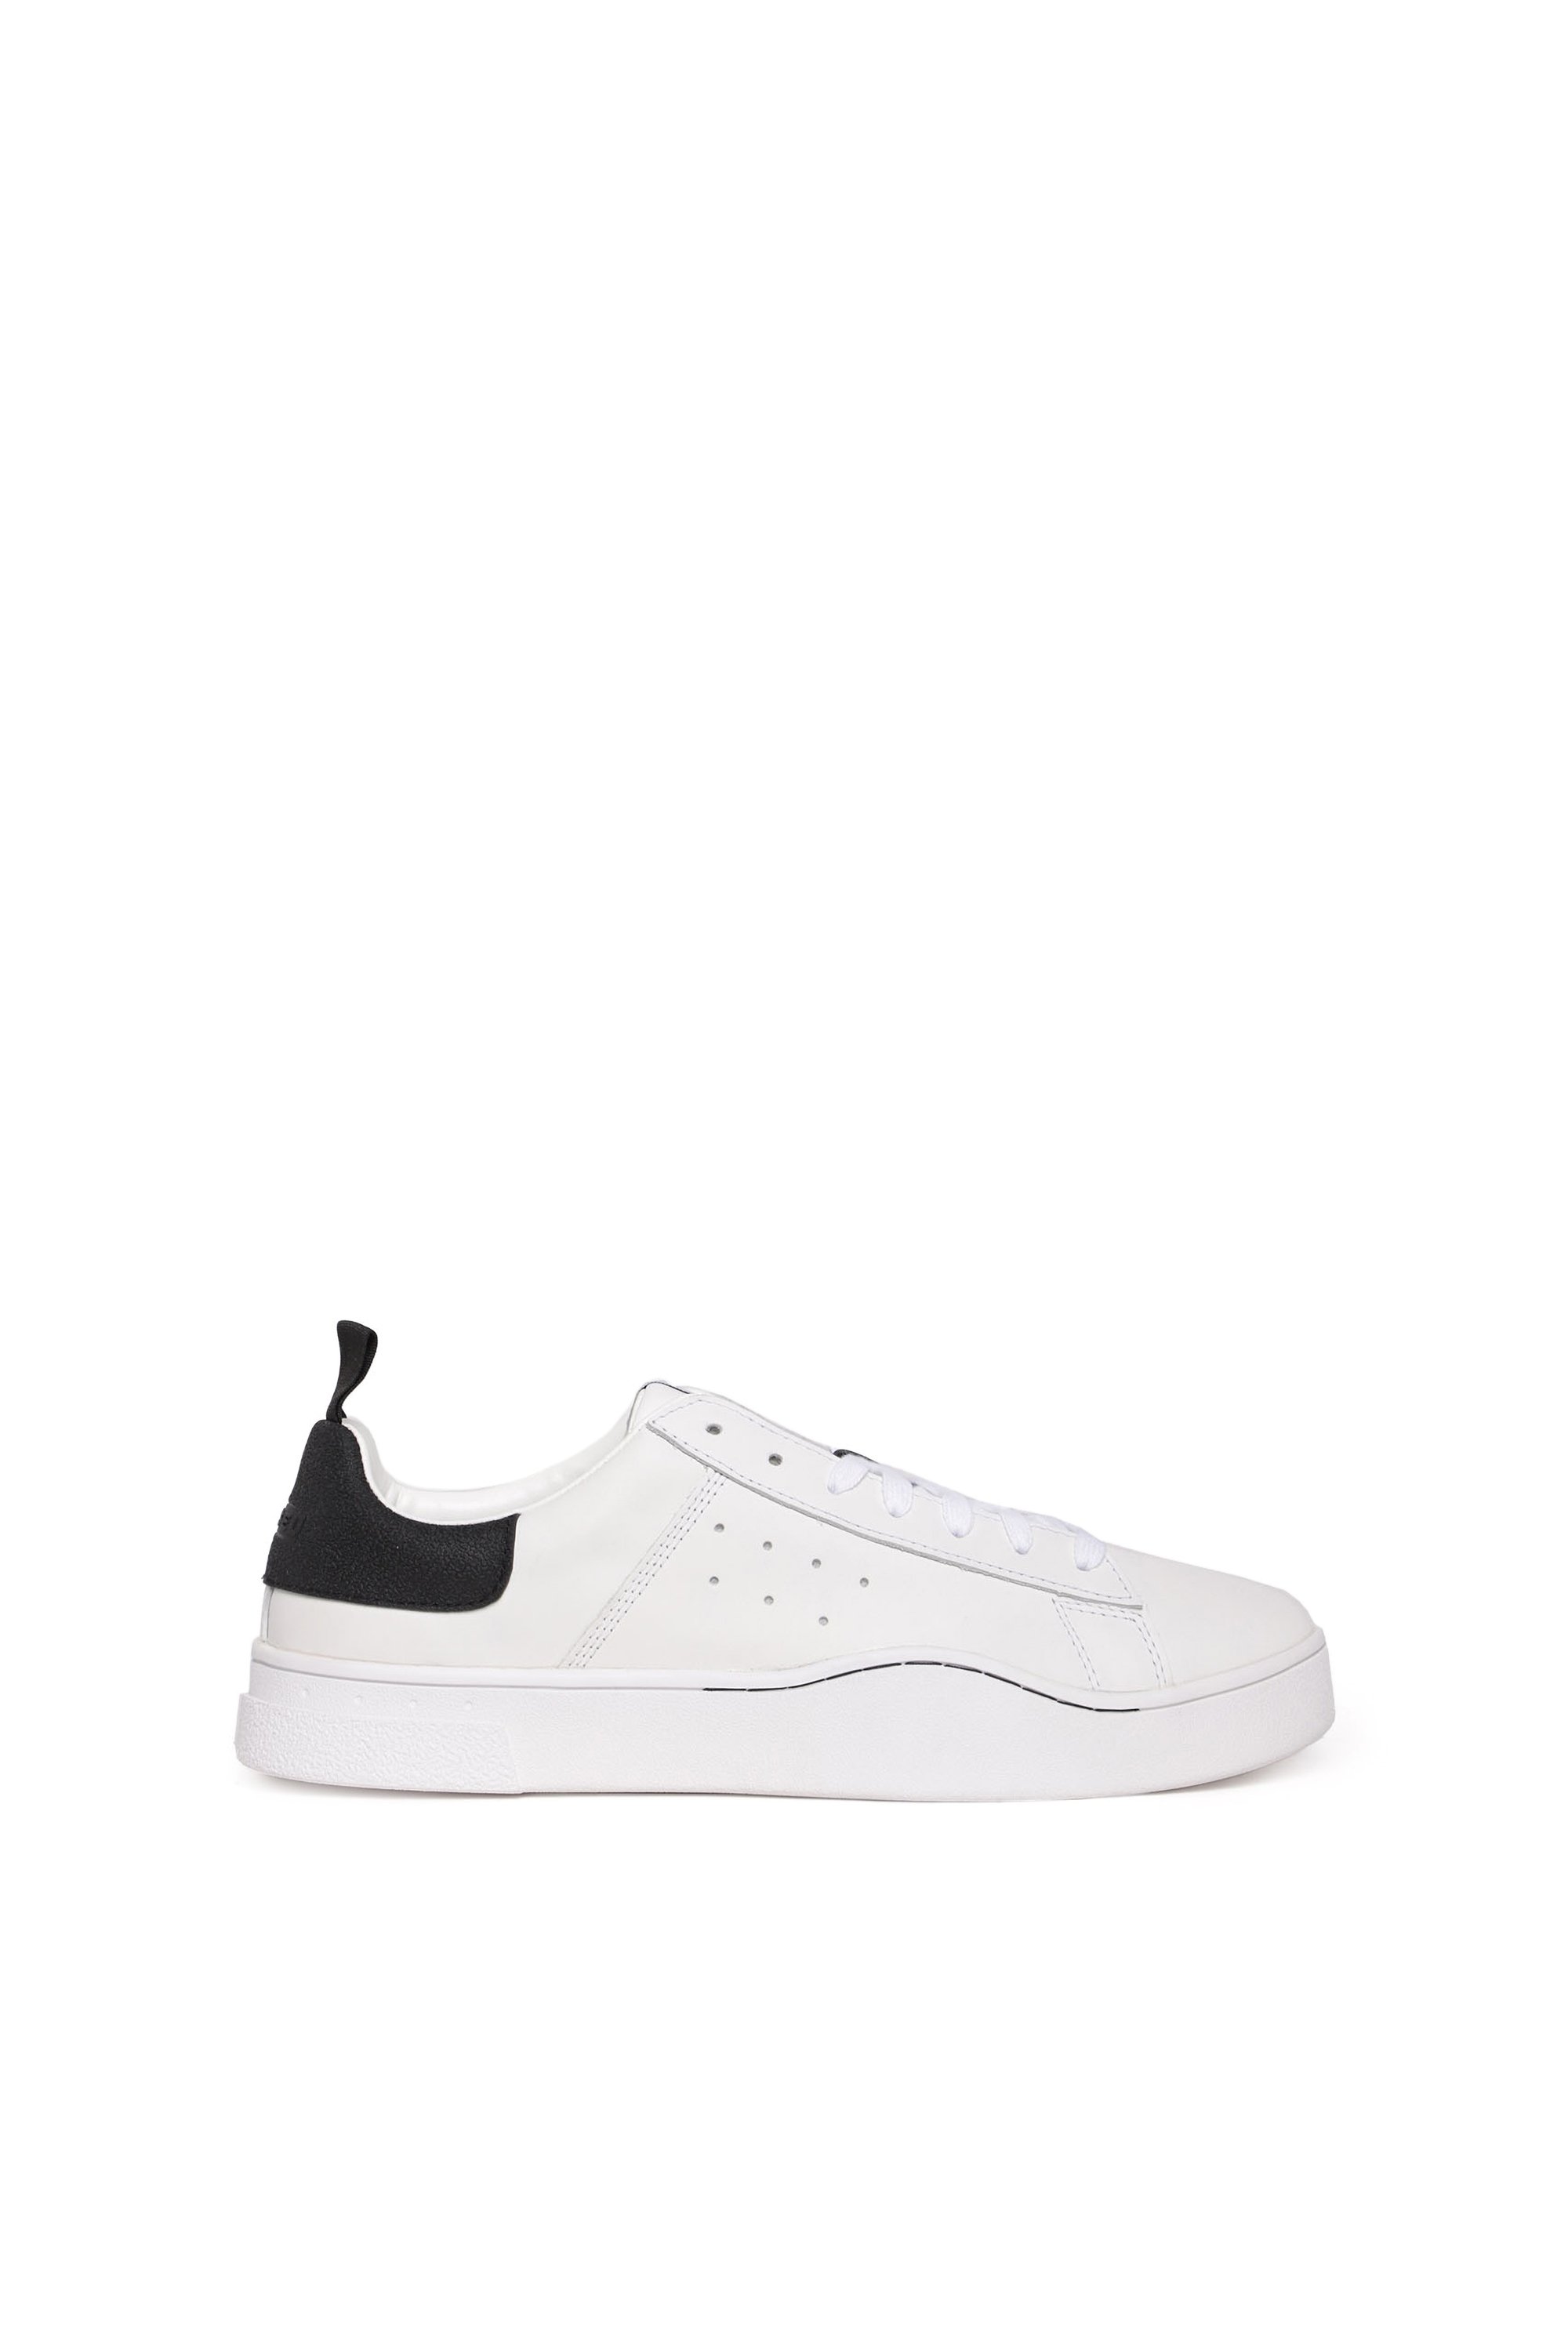 Diesel - S-CLEVER LOW, Blanco/Negro - Image 1